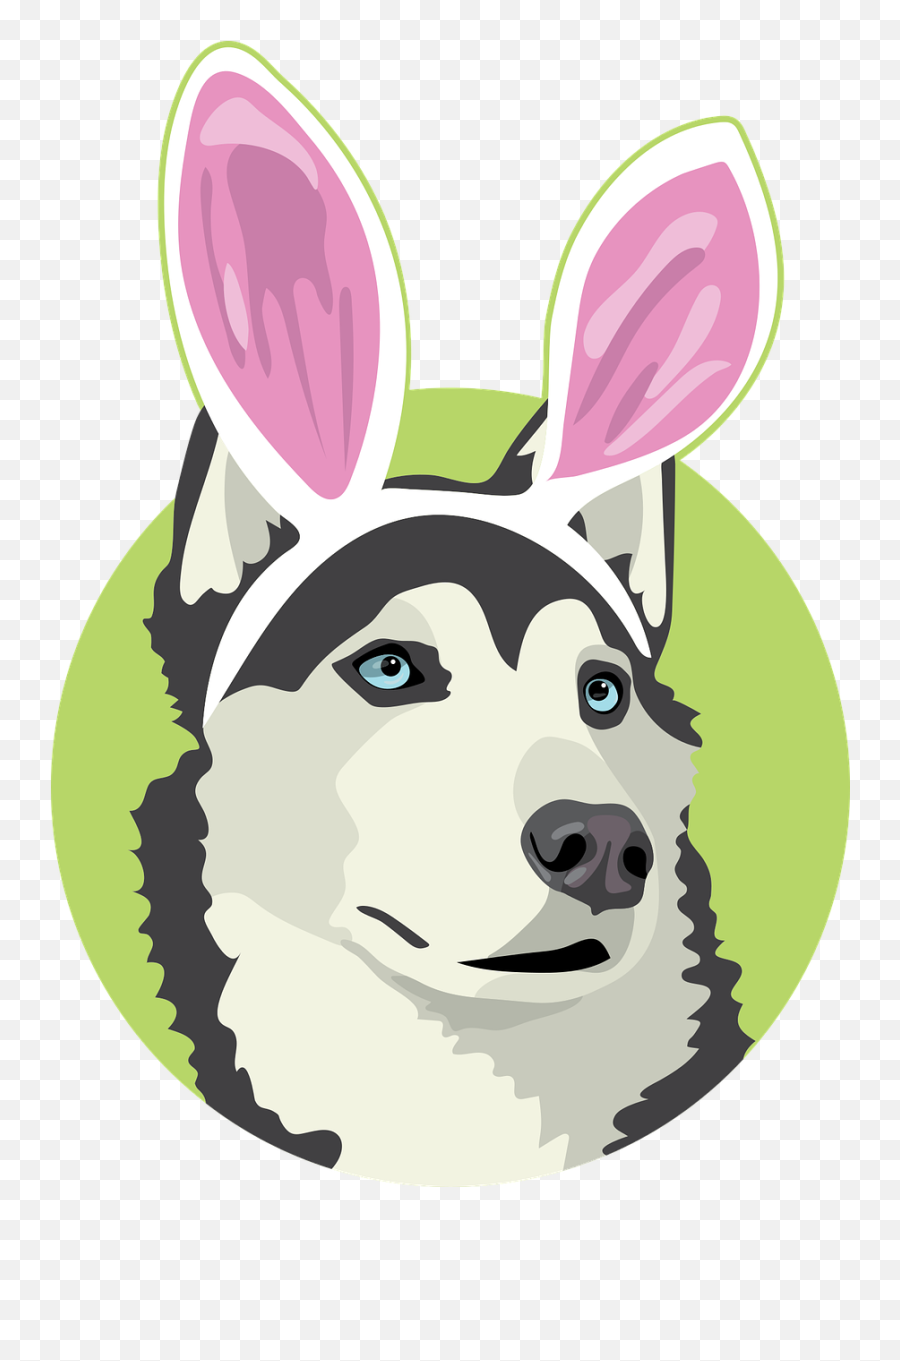 Easter Dog - Free Vector Graphic On Pixabay Free Clipart Easter Dog Emoji,Bunny Ears Clipart